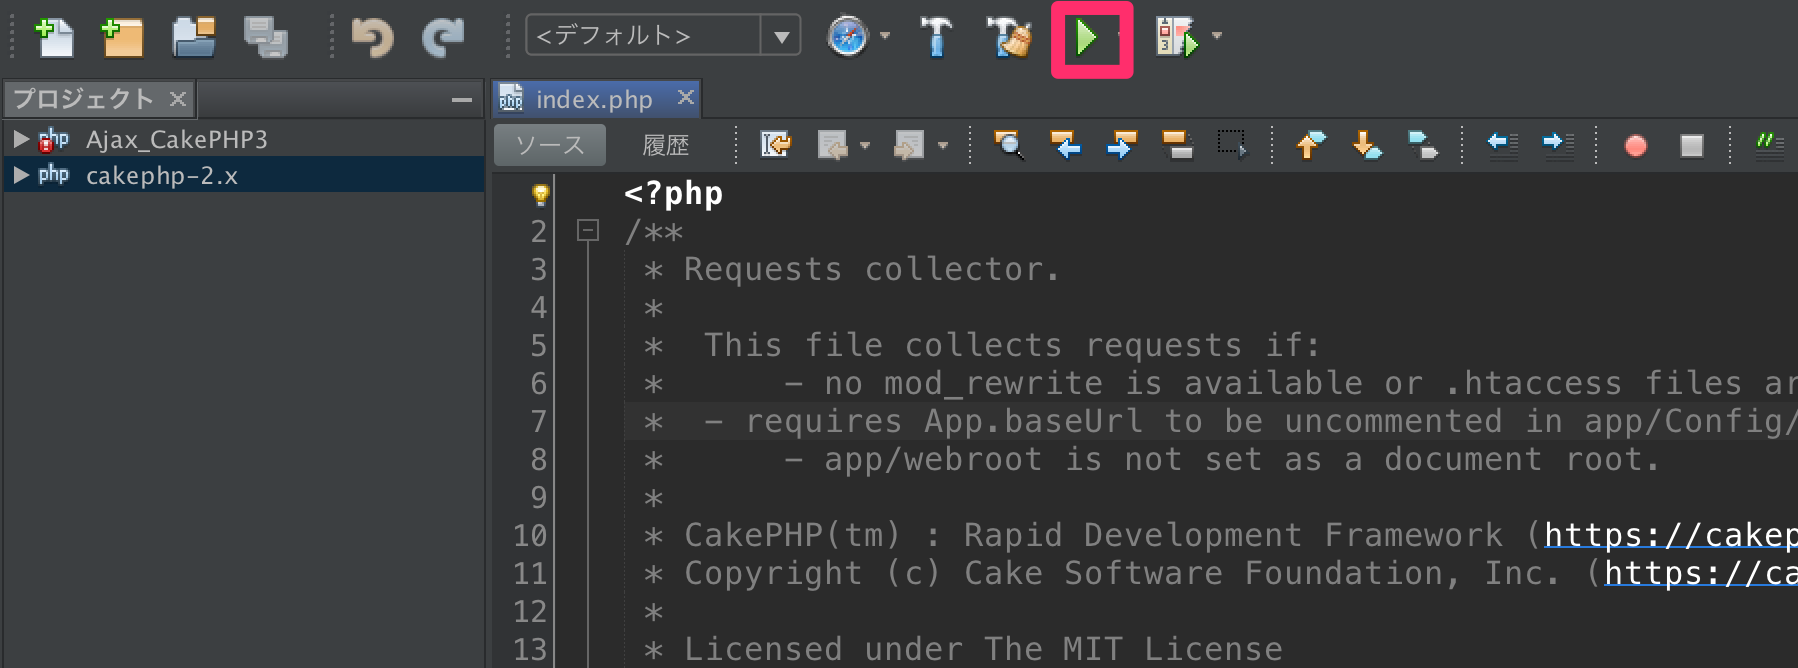 cakephp-2_x_-_NetBeans_IDE_8_2.png